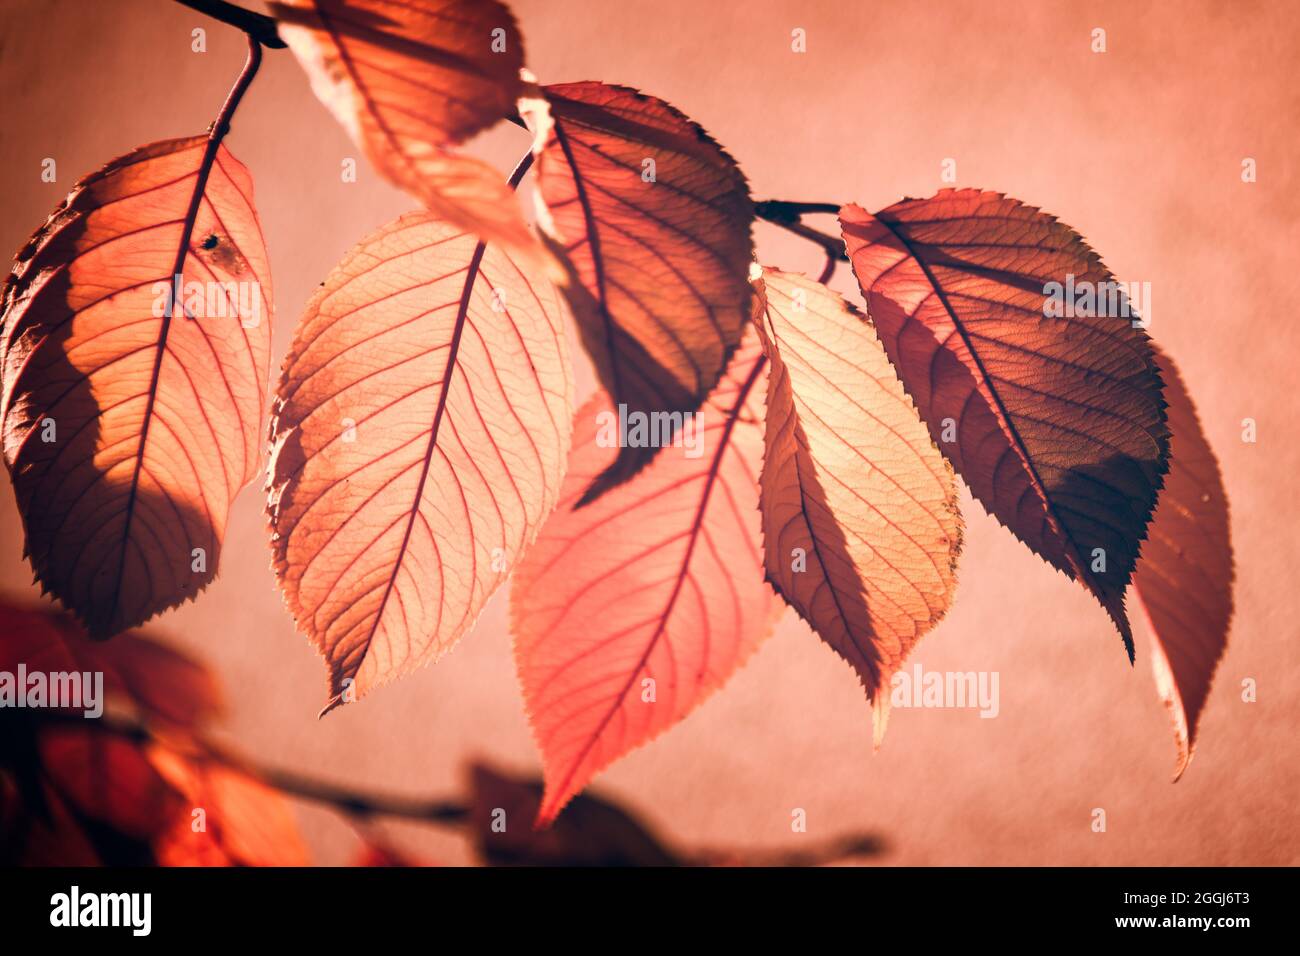 Backlit red fall leaves on a tree branch, pink background Stock Photo